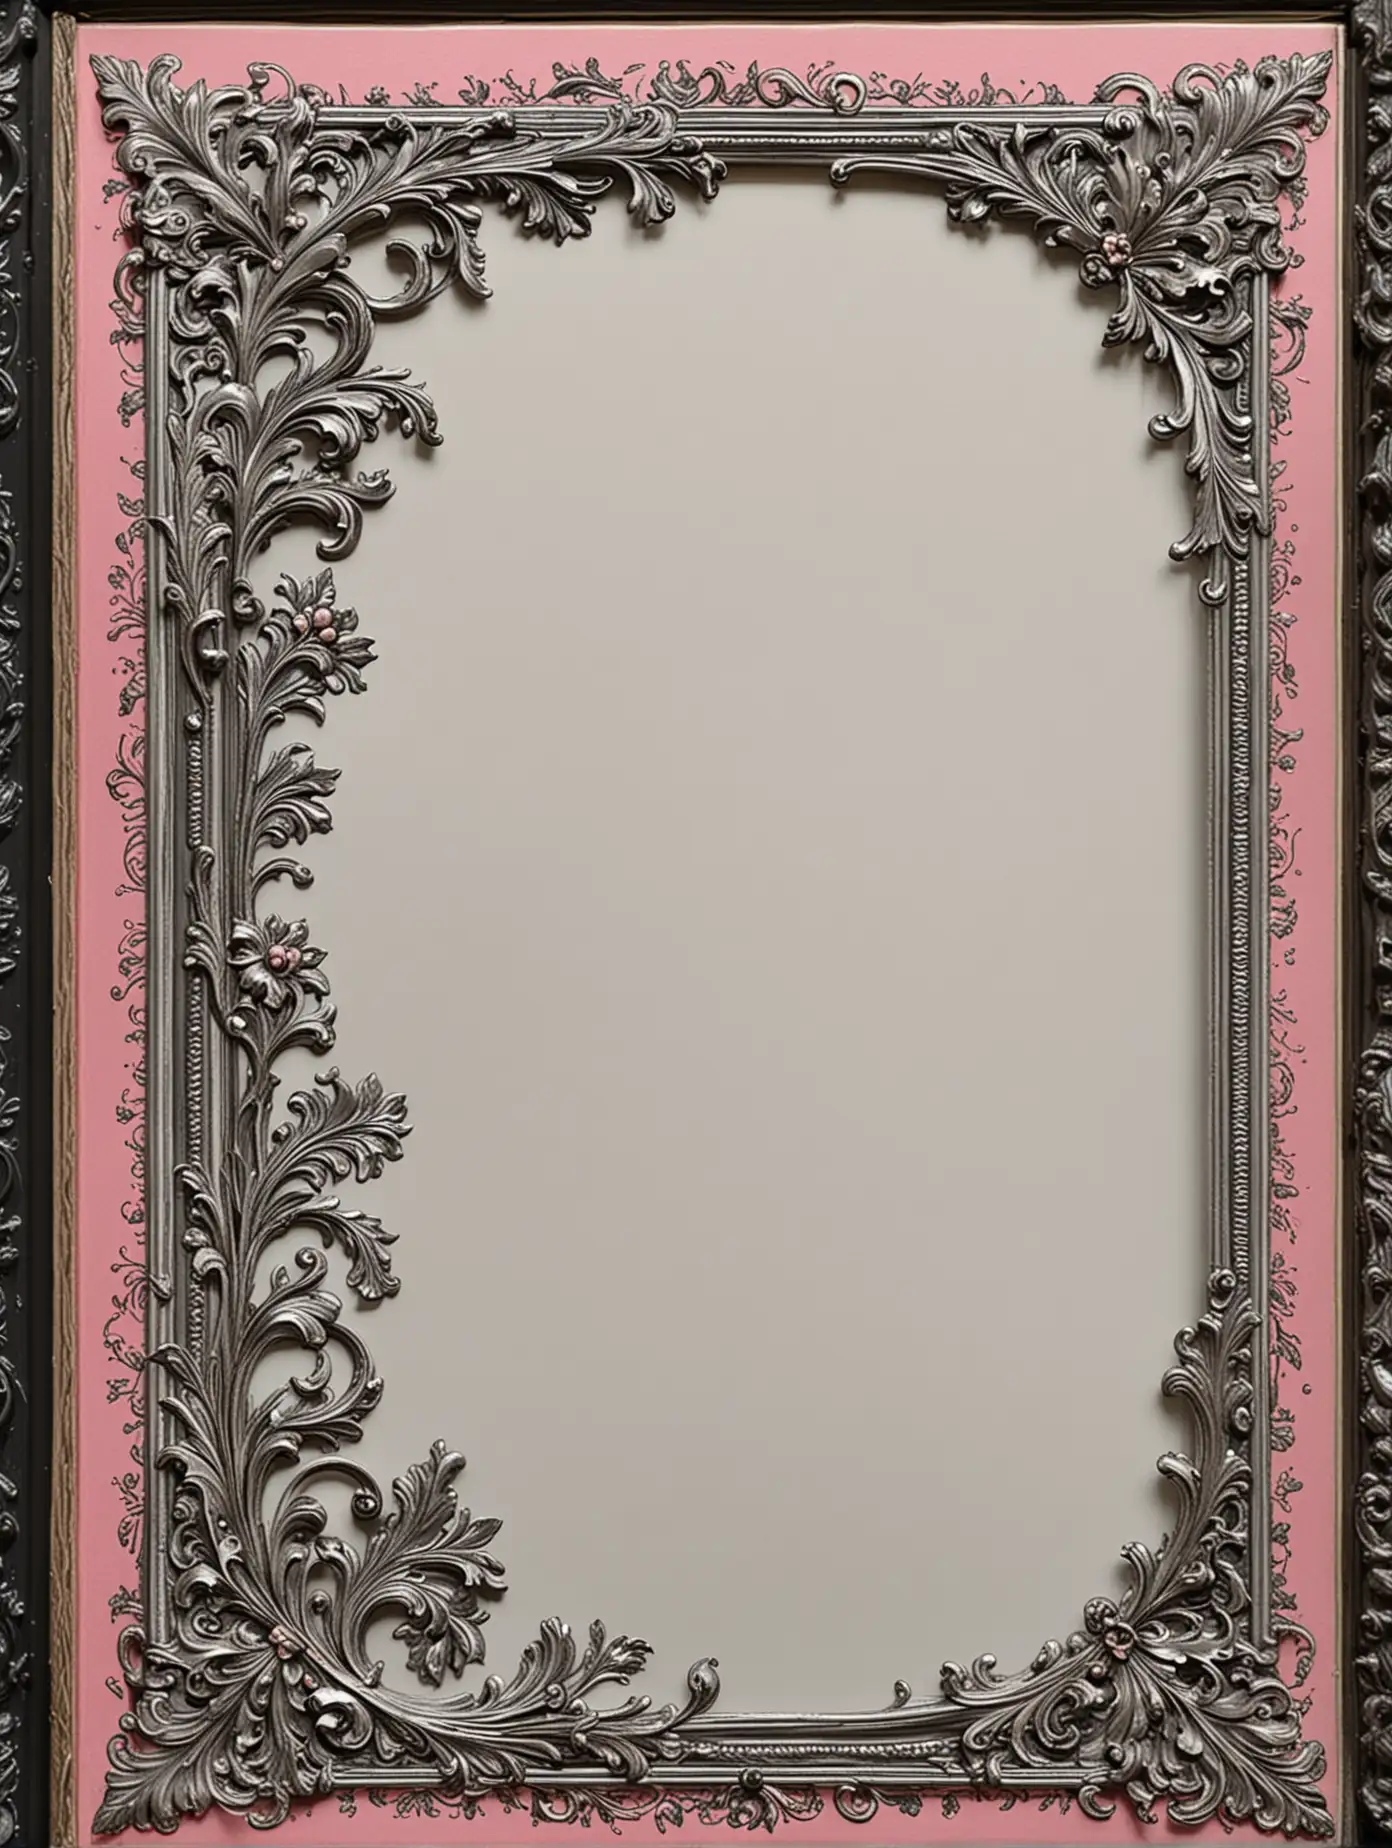 Elegant Silver and Pink Acanthus Scrollwork Photo Frame